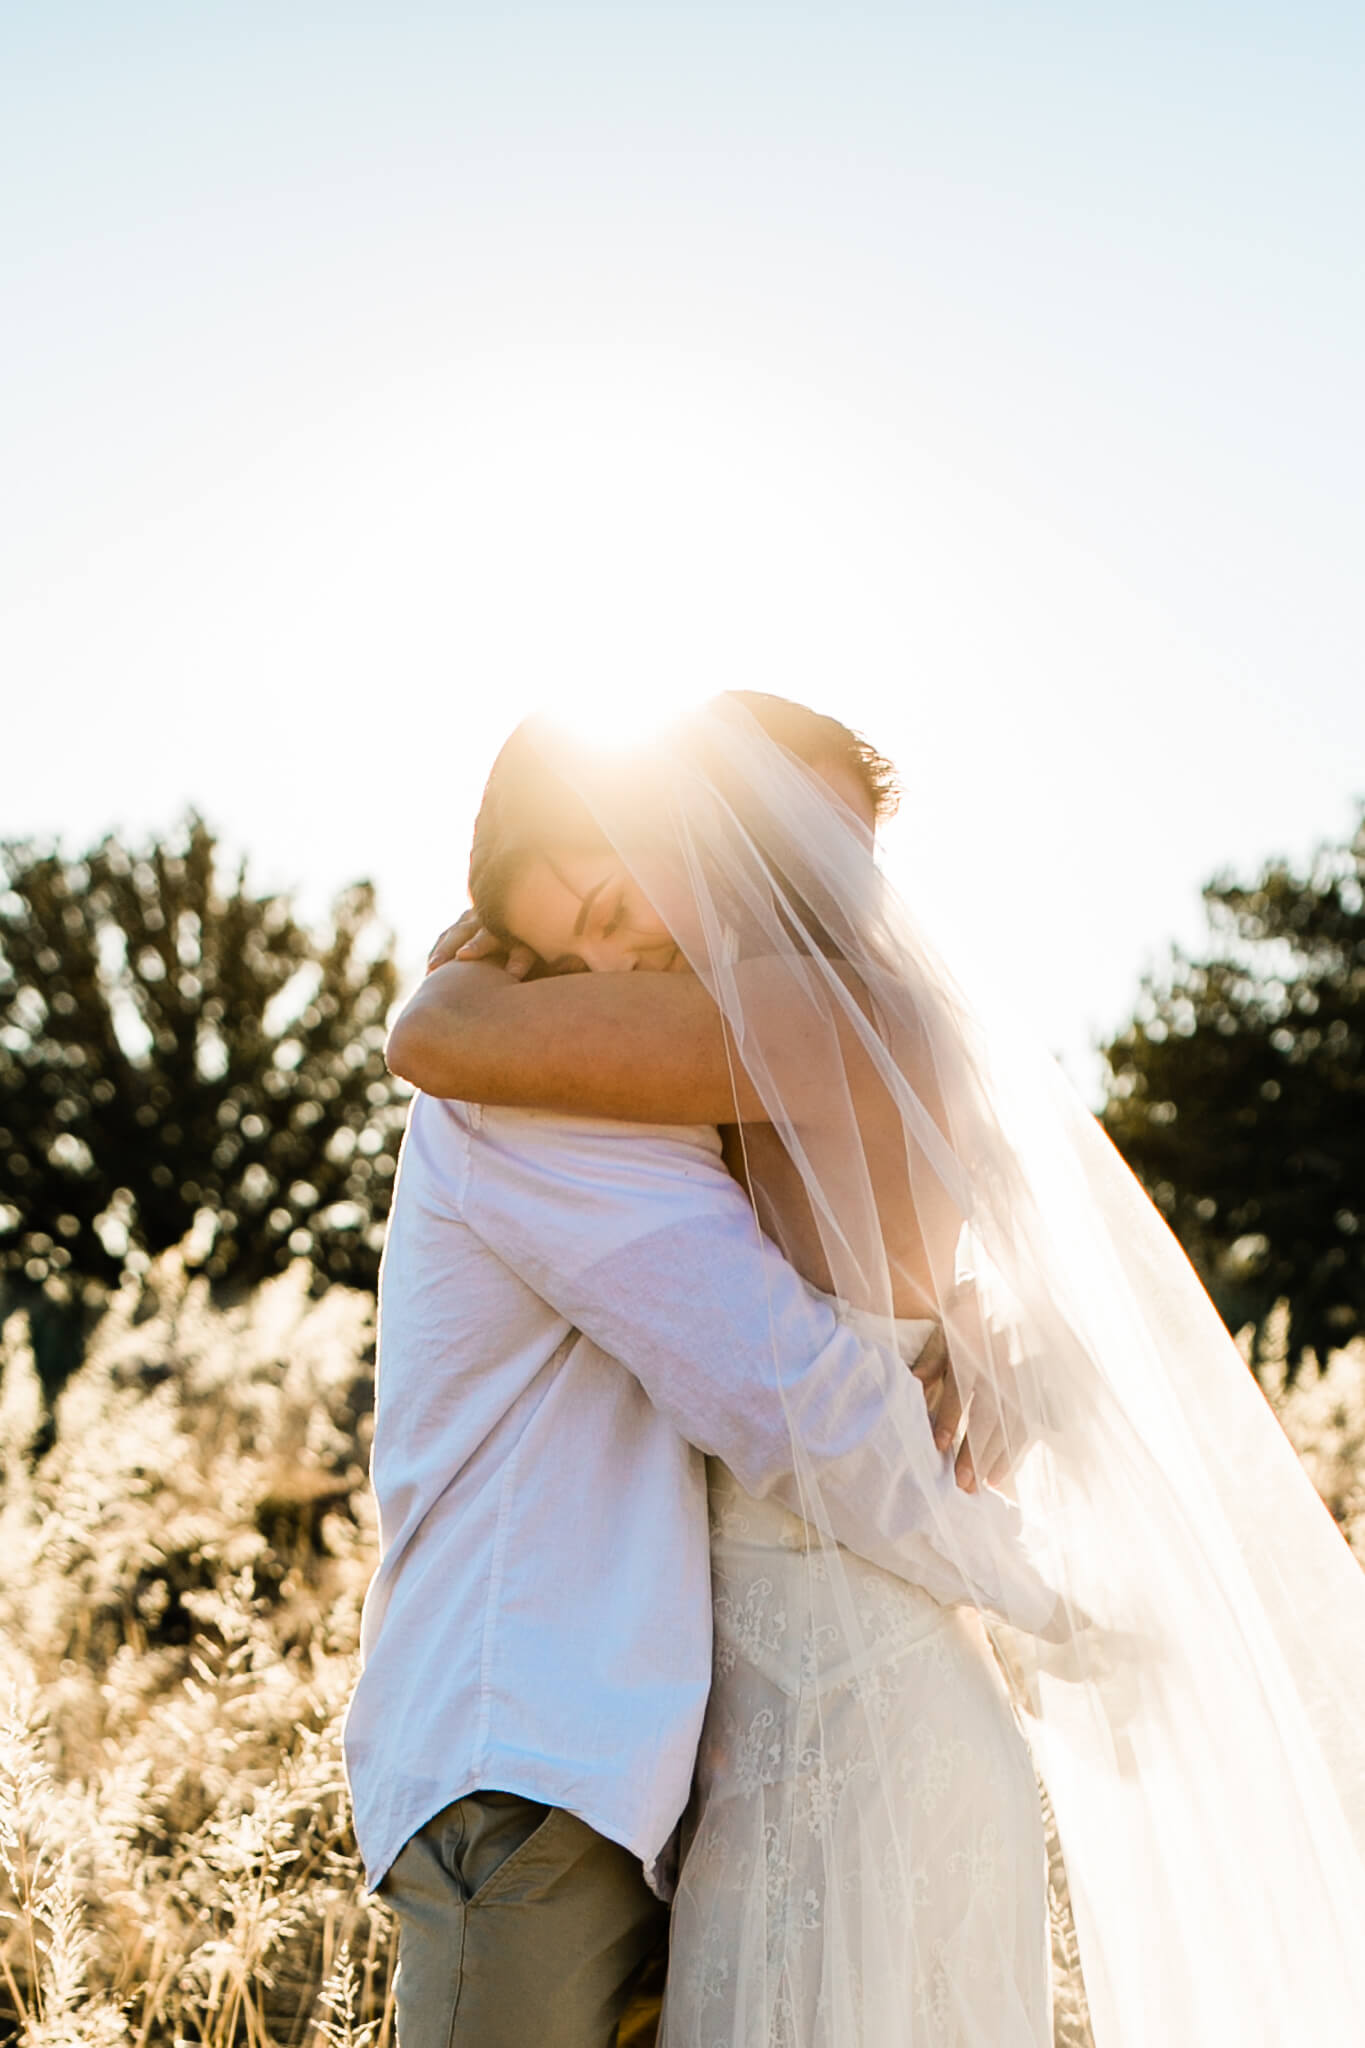 The bride hugs the groom with the sun bursting behind them.